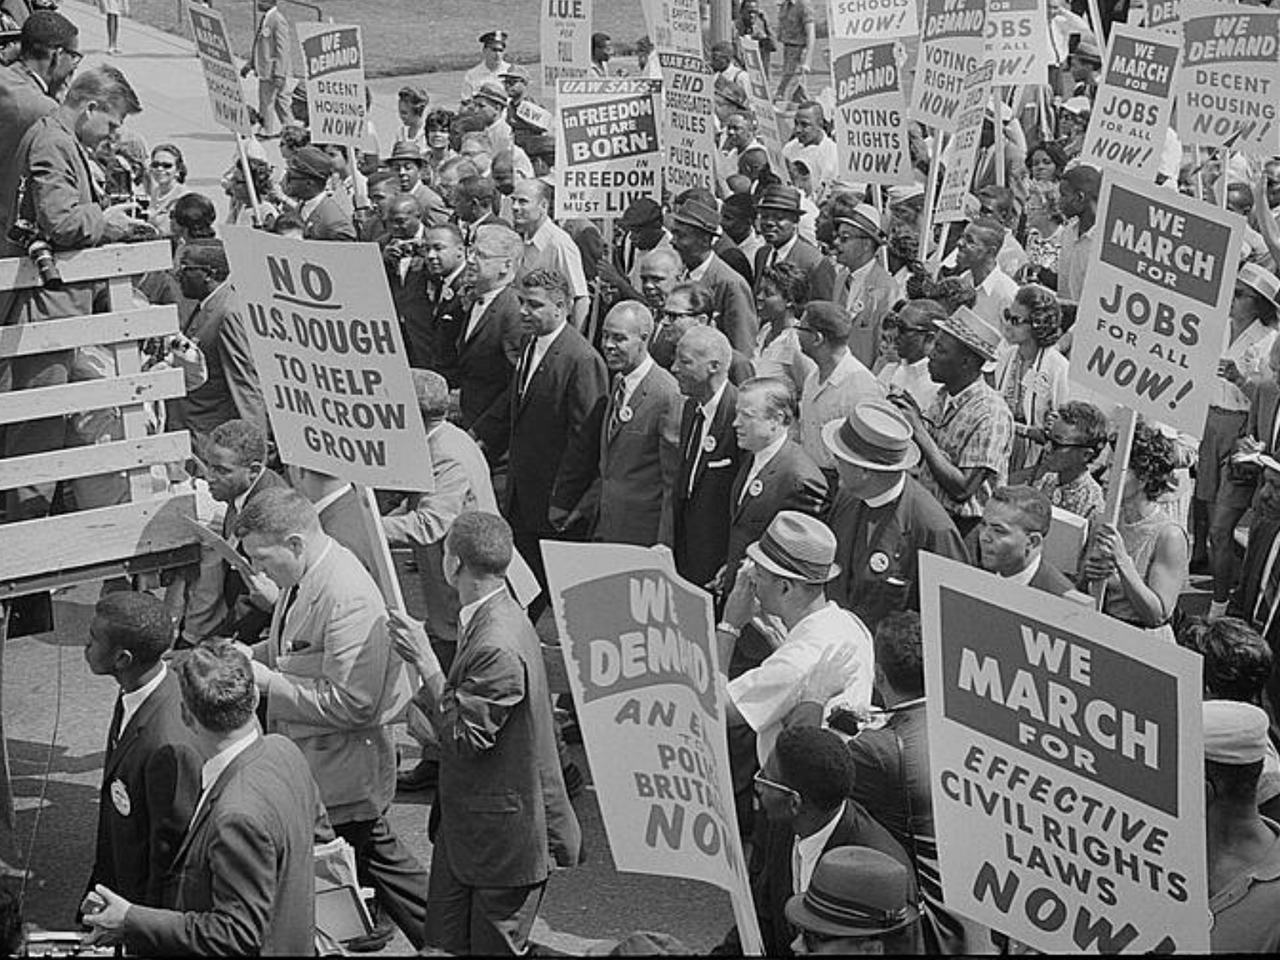 Photograph of civil rights leaders, including Martin Luther King, Jr., surrounded by crowds carrying signs.